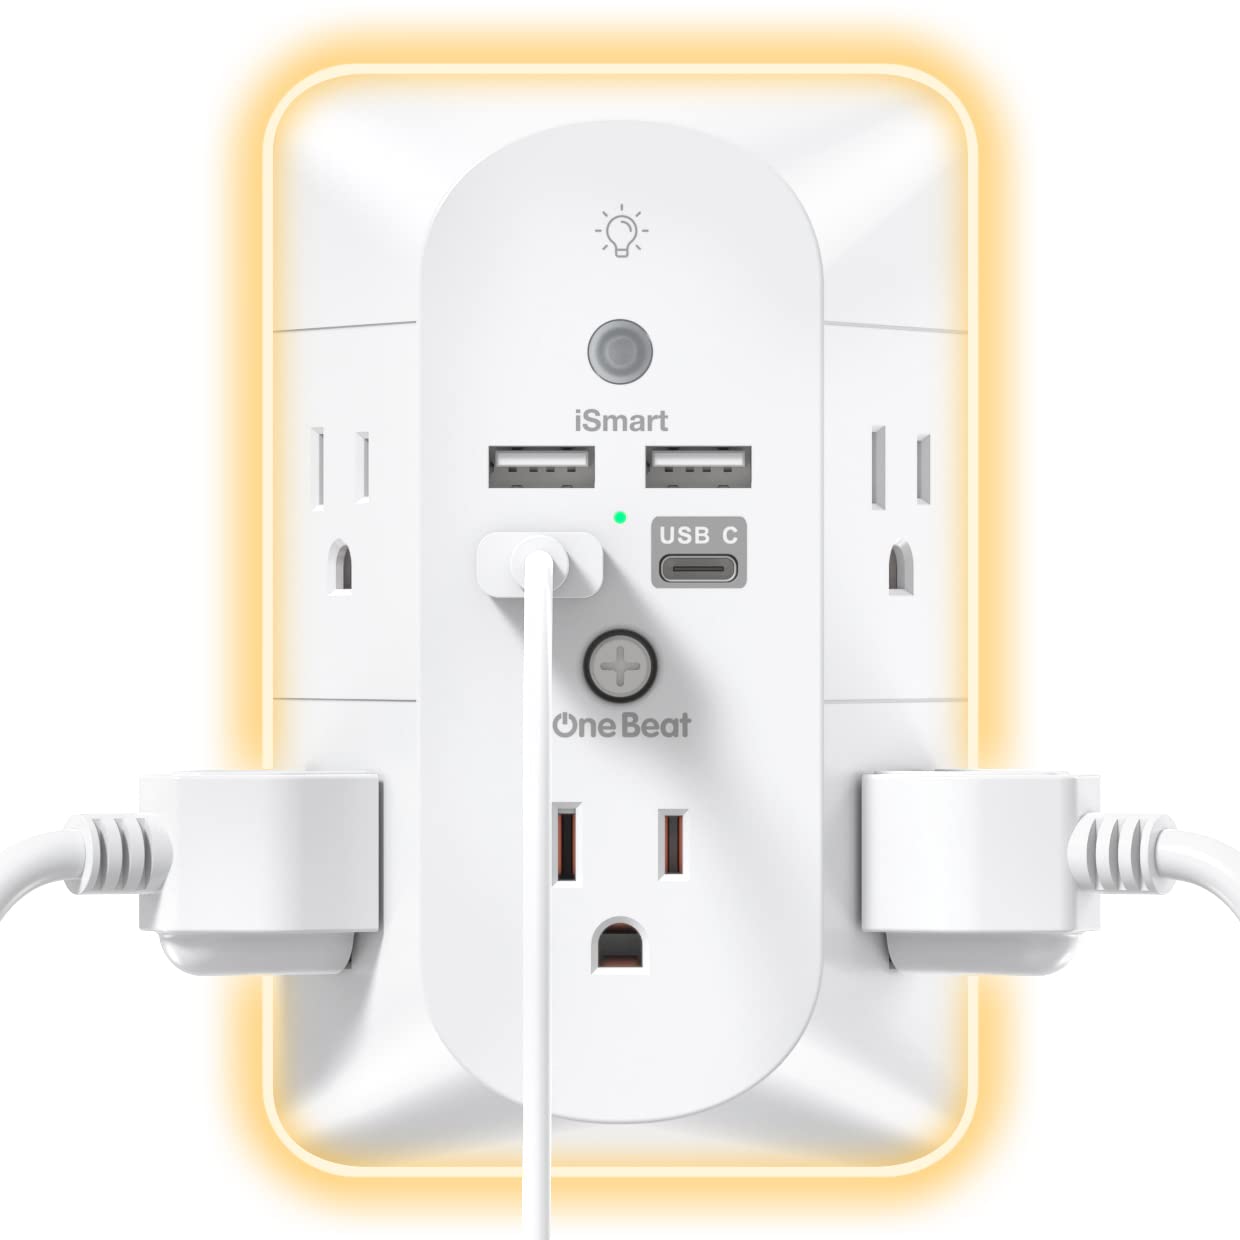 Surge Protector, Outlet Extender with Night Light, Power Strip, 5 Outlet Splitter (3 Side) and 4 USB Charger(1 USB C), USB Wall Charger, Multi Plug Outlets for $12.2